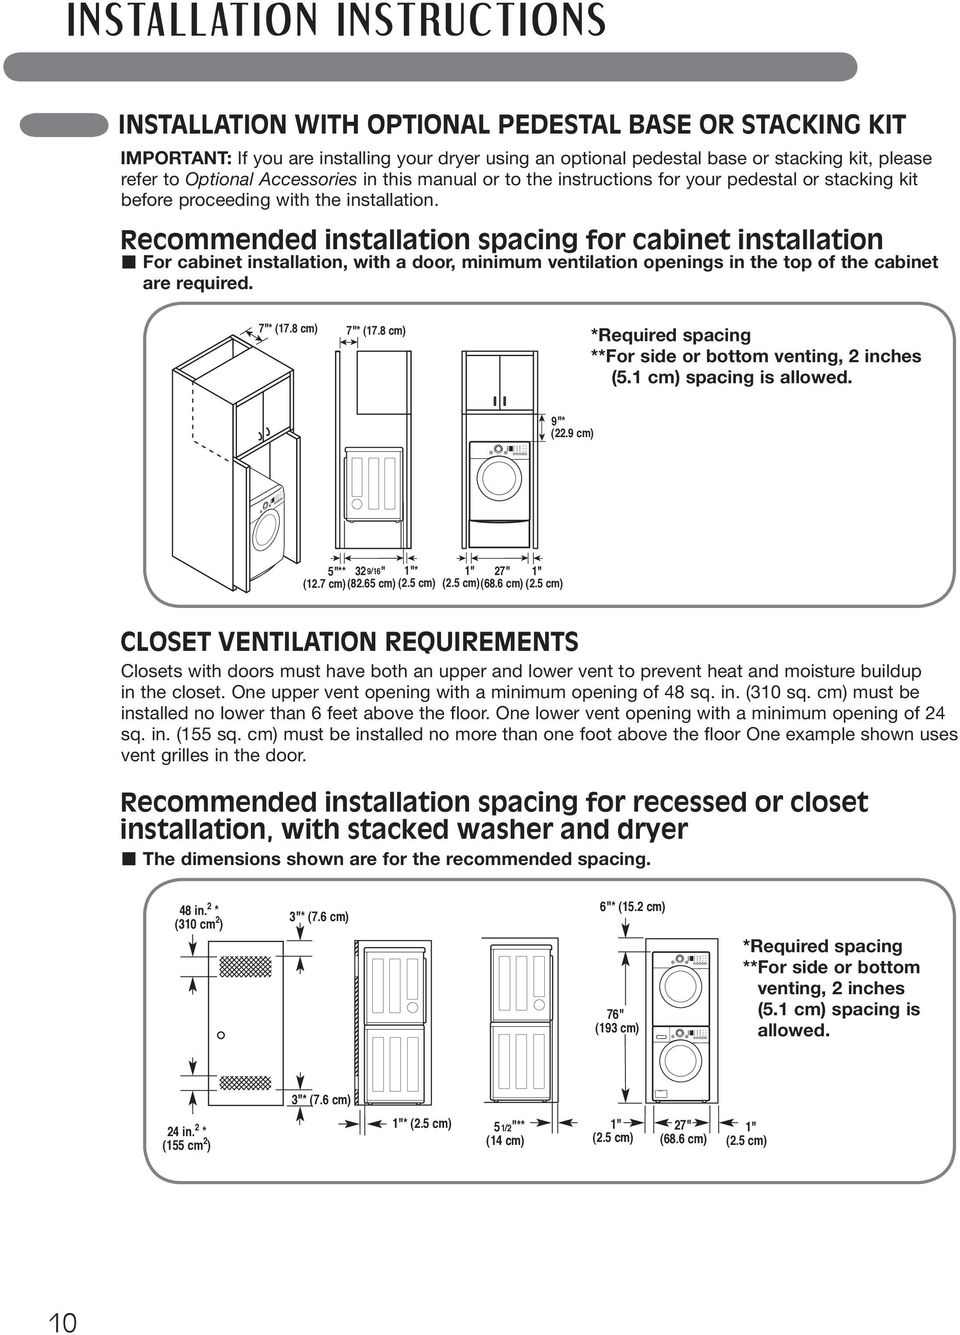 Recommended installation spacing for cabinet installation For cabinet installation, with a door, minimum ventilation openings in the top of the cabinet are required. 7"* (17.8 cm) 7"* (17.